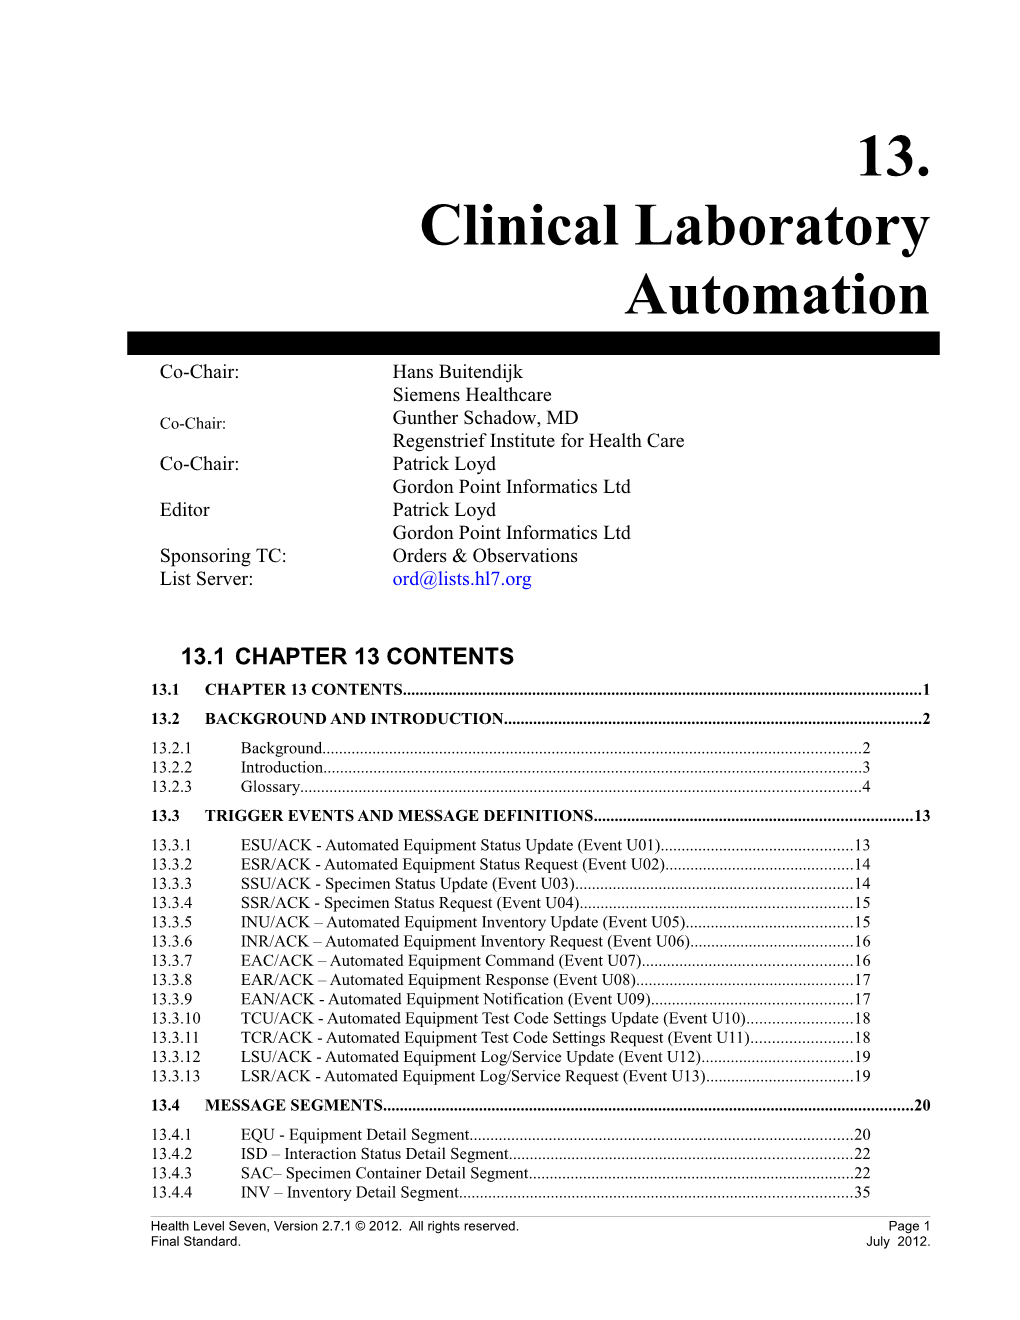 V2.7 Chapter 13 - Clinical Laboratory Automation